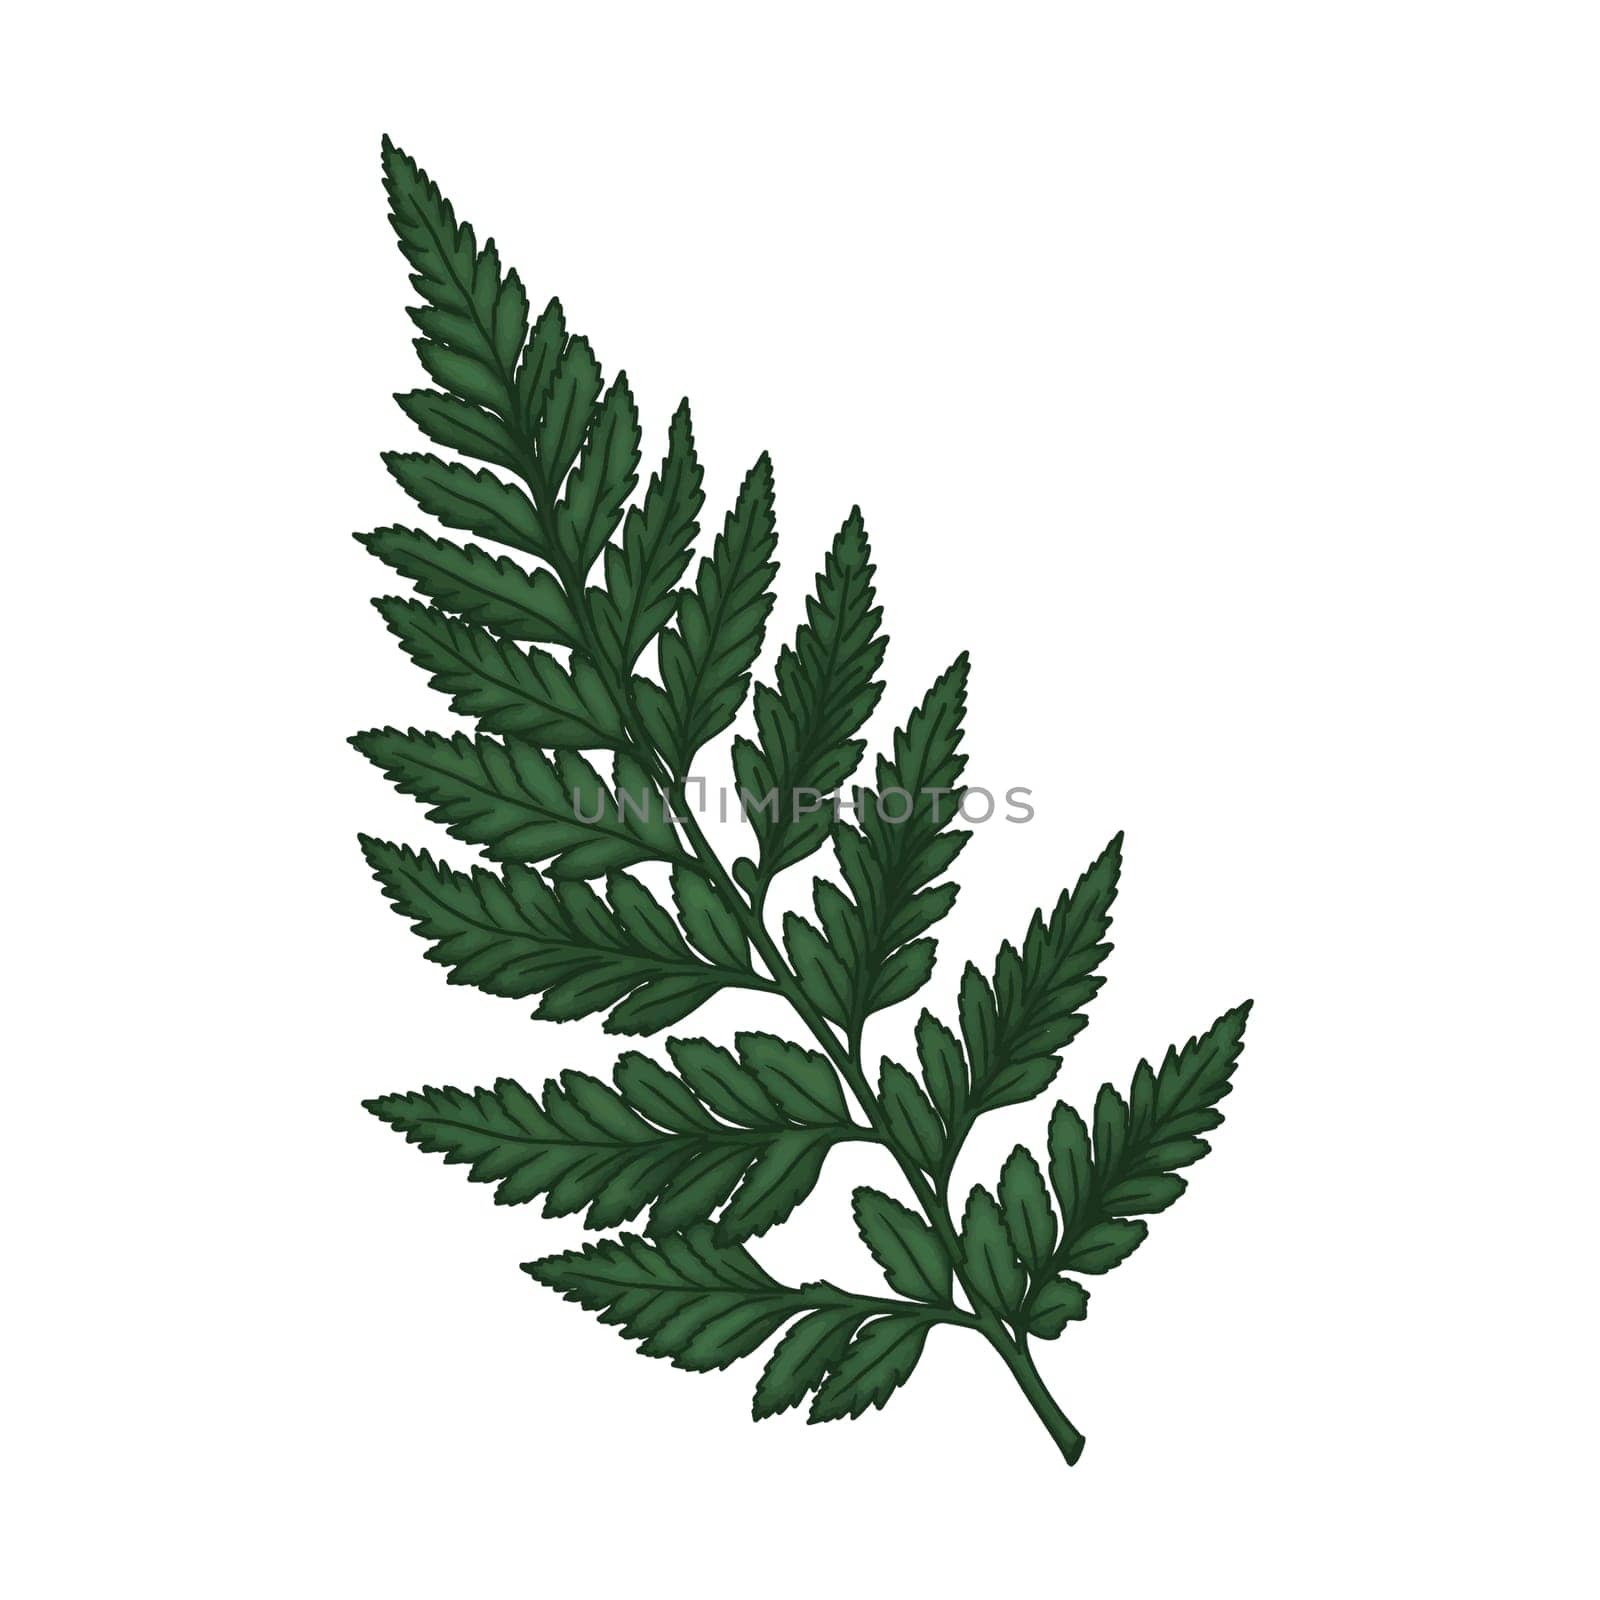 Fern Green Leaves Clipart. Tropical Green Leaves design elements isolated on white background for pattern, decoration, planner sticker, sublimation and more. by Skyecreativestudio